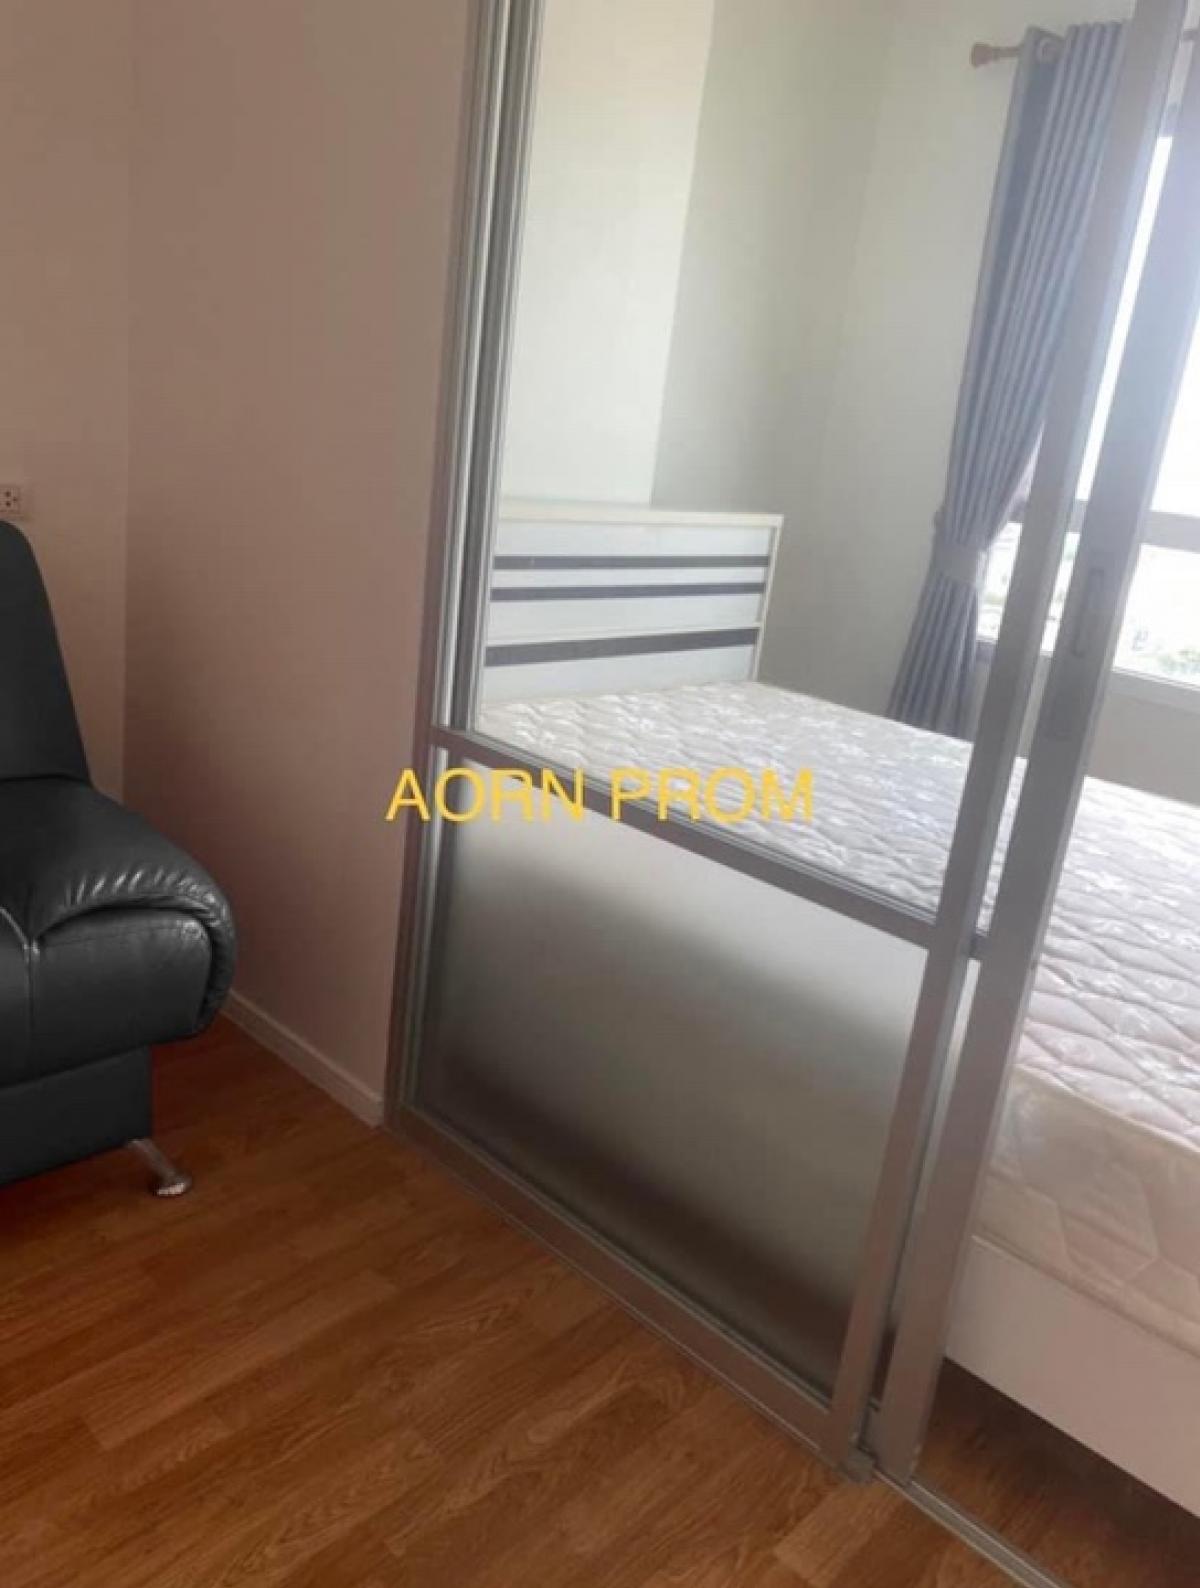 For RentCondoBang kae, Phetkasem : For rent, Lumpini Park Phetkasem 98 (Lumpini Park Phetkasem 98), Building A, first building, high floor, beautiful view, has a washing machine, air conditioner, TV, water heater, refrigerator, separating the bedroom into proportions.